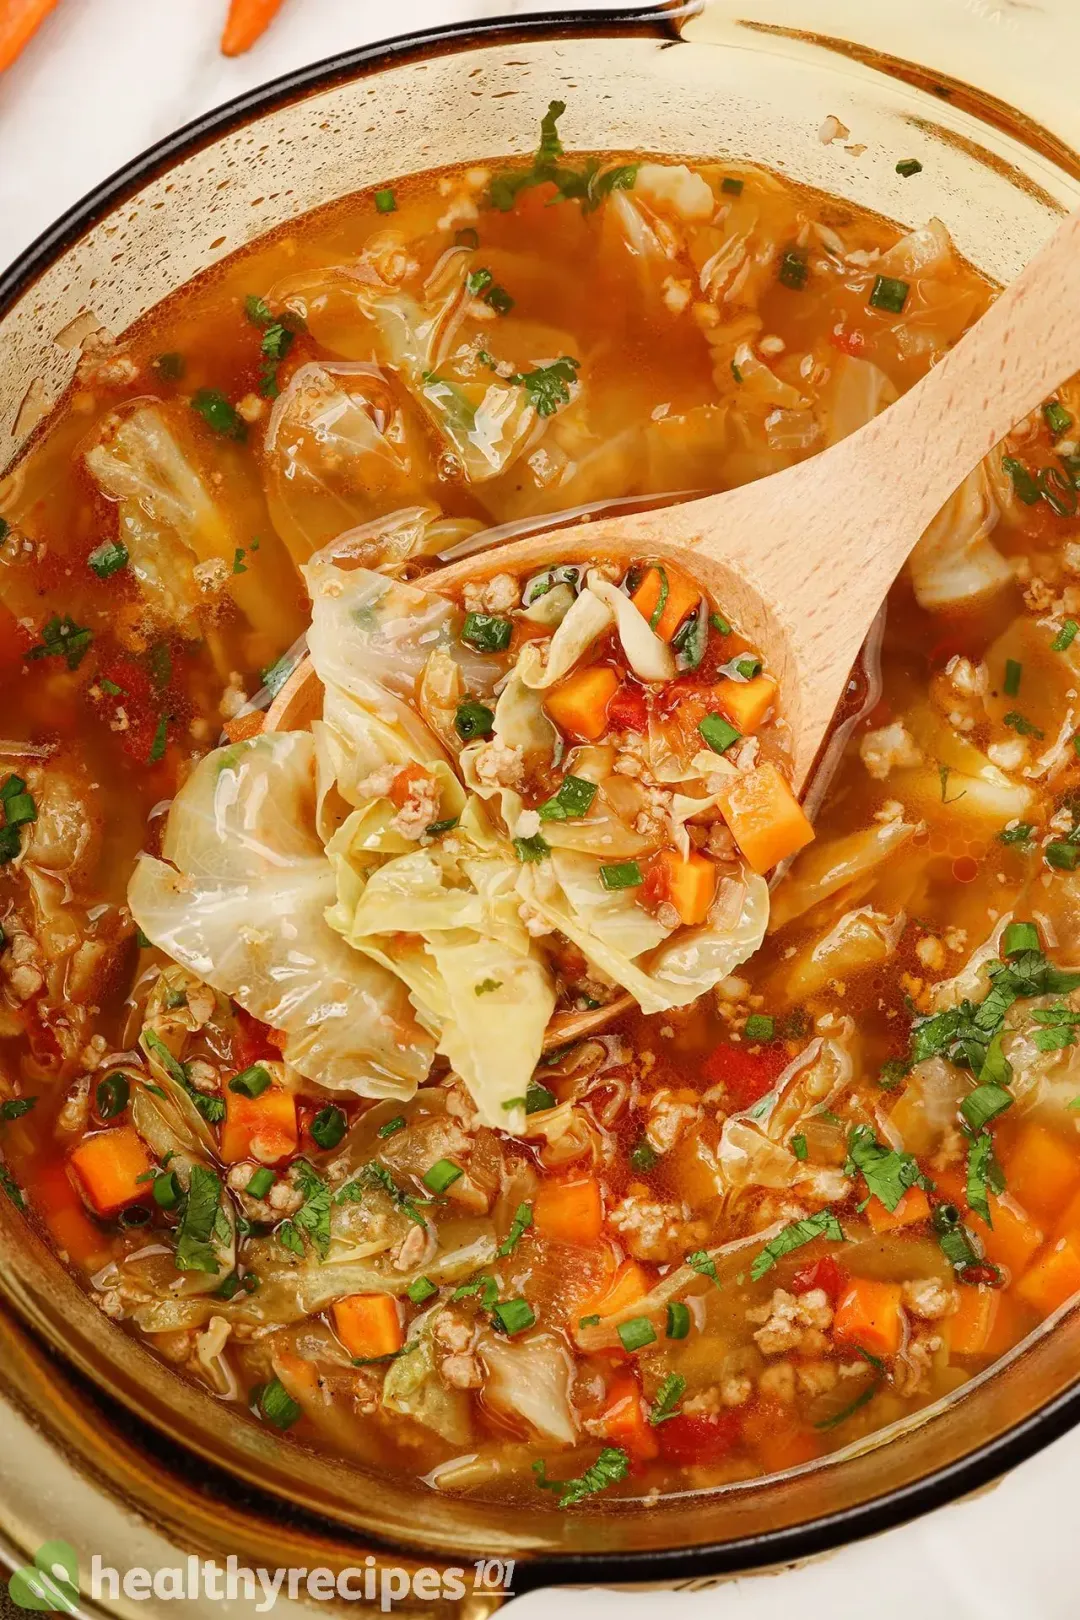 Cabbage Soup Recipe: A Savory, Delicate Bowl of Your Dreams